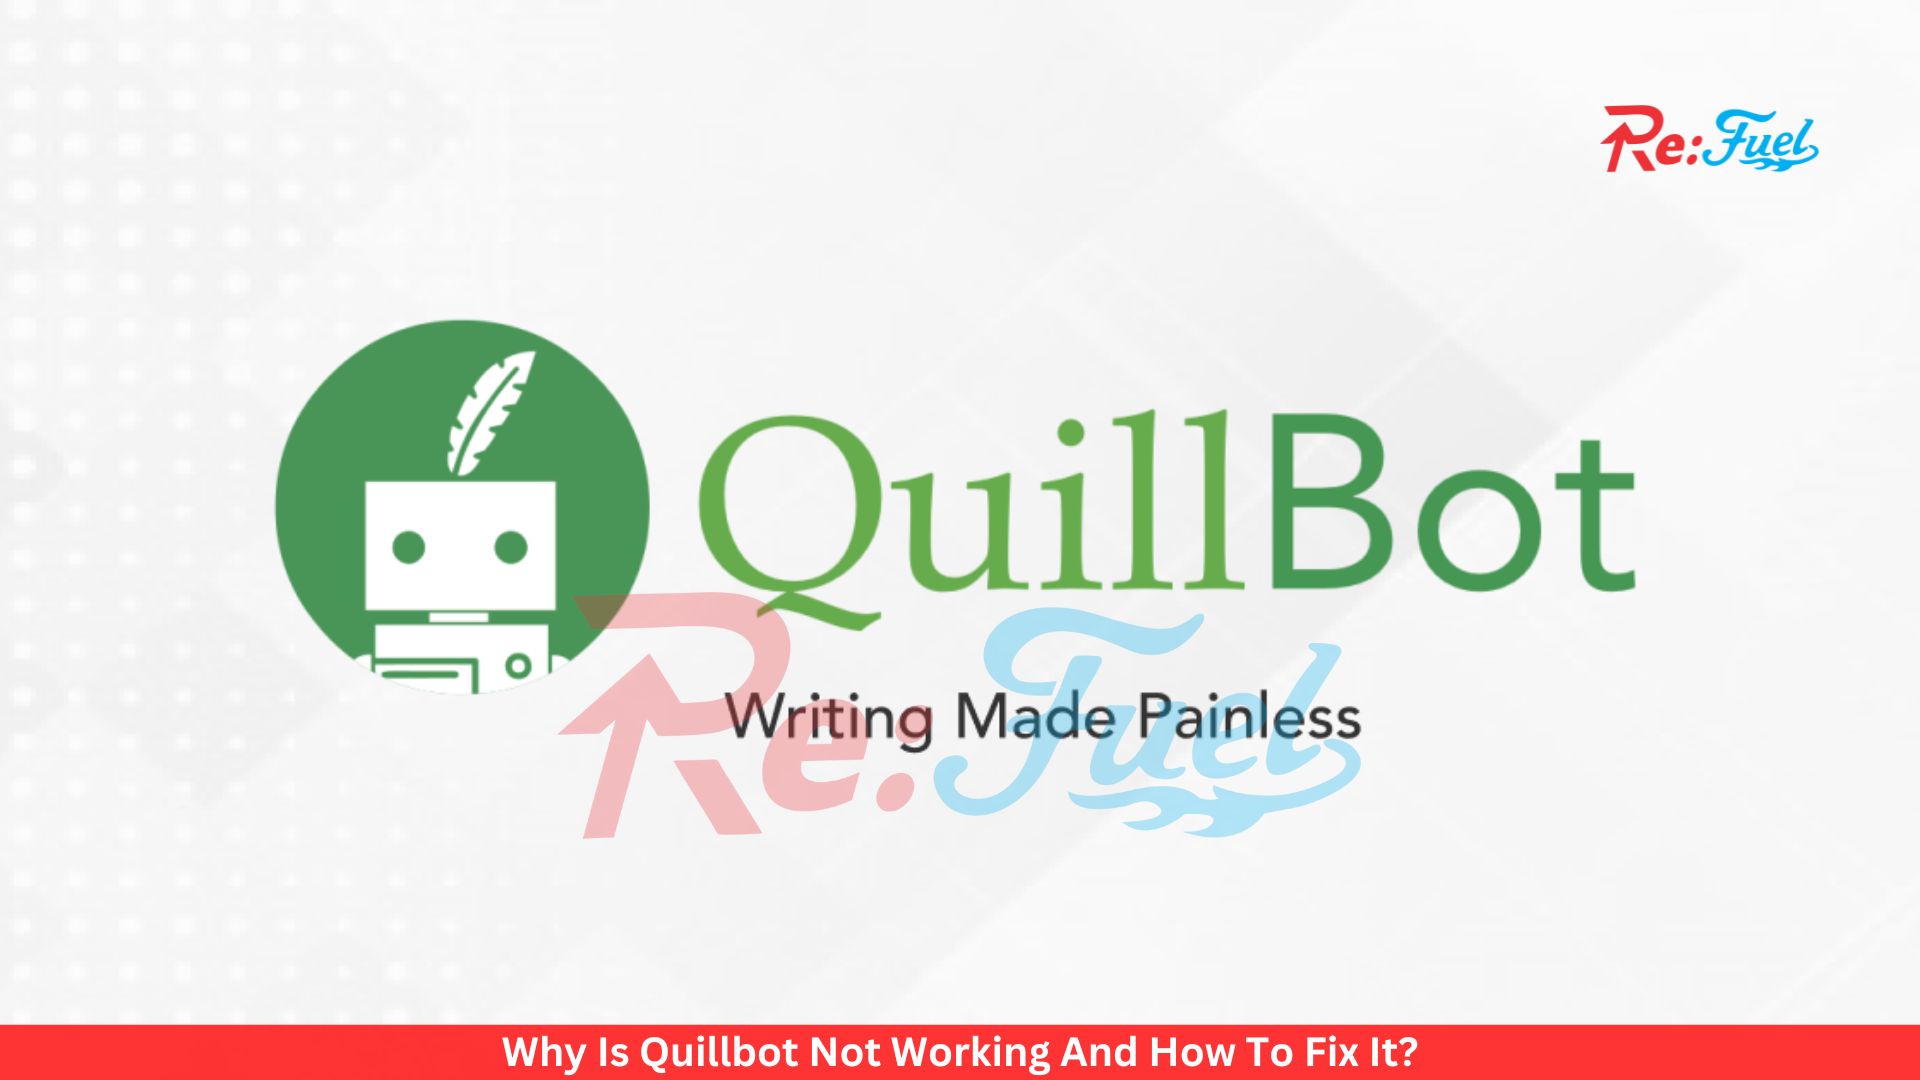 Why Is Quillbot Not Working And How To Fix It?